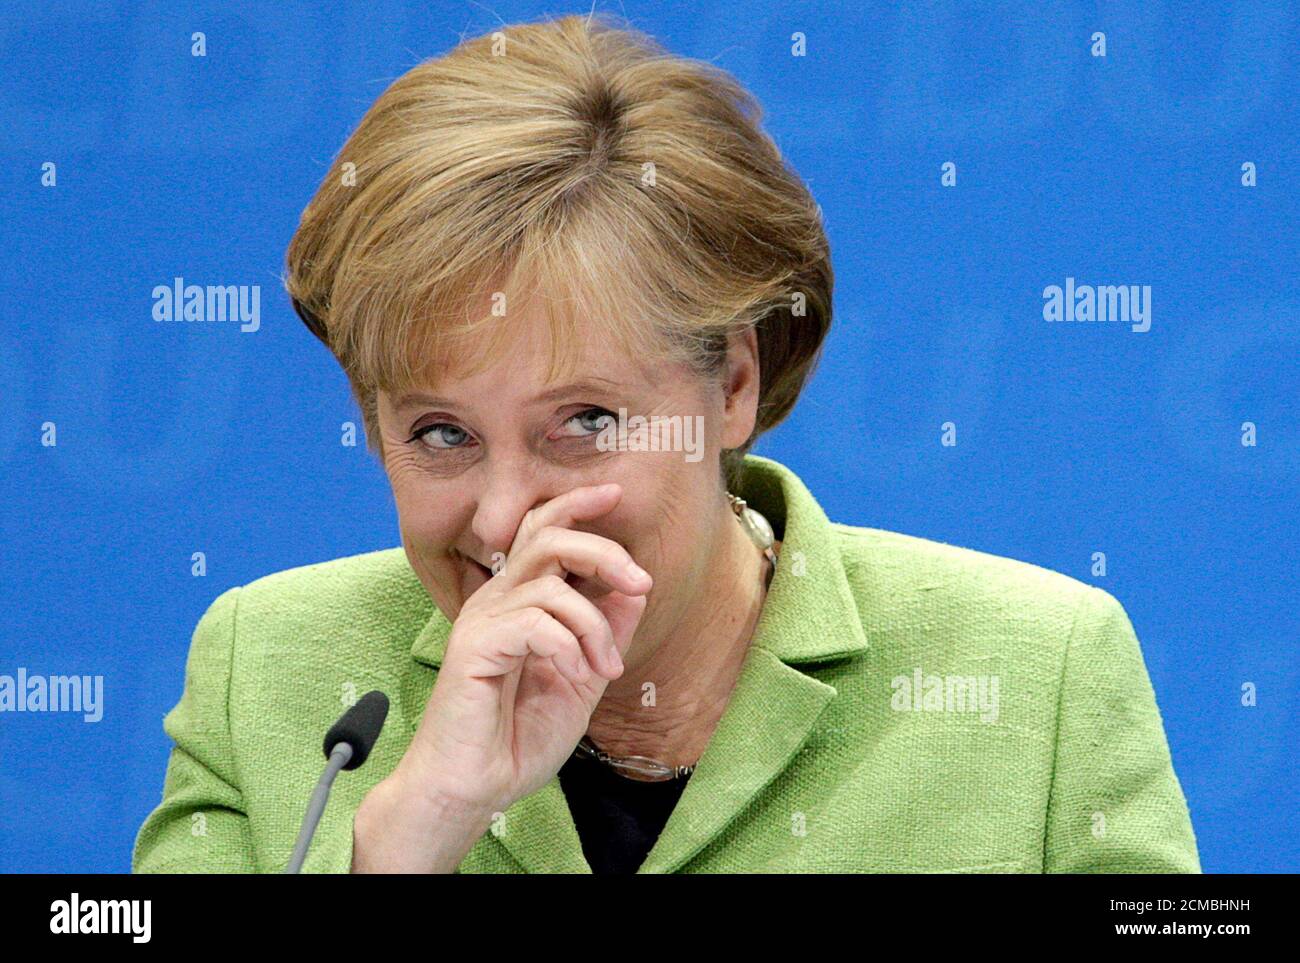 German Chancellor Angela Merkel gestures during a regional party leader convention of the conservative Christian Democratic Union (CDU) party in Berlin June 13, 2009.  REUTERS/Thomas Peter  (GERMANY POLITICS HEADSHOT) Stock Photo